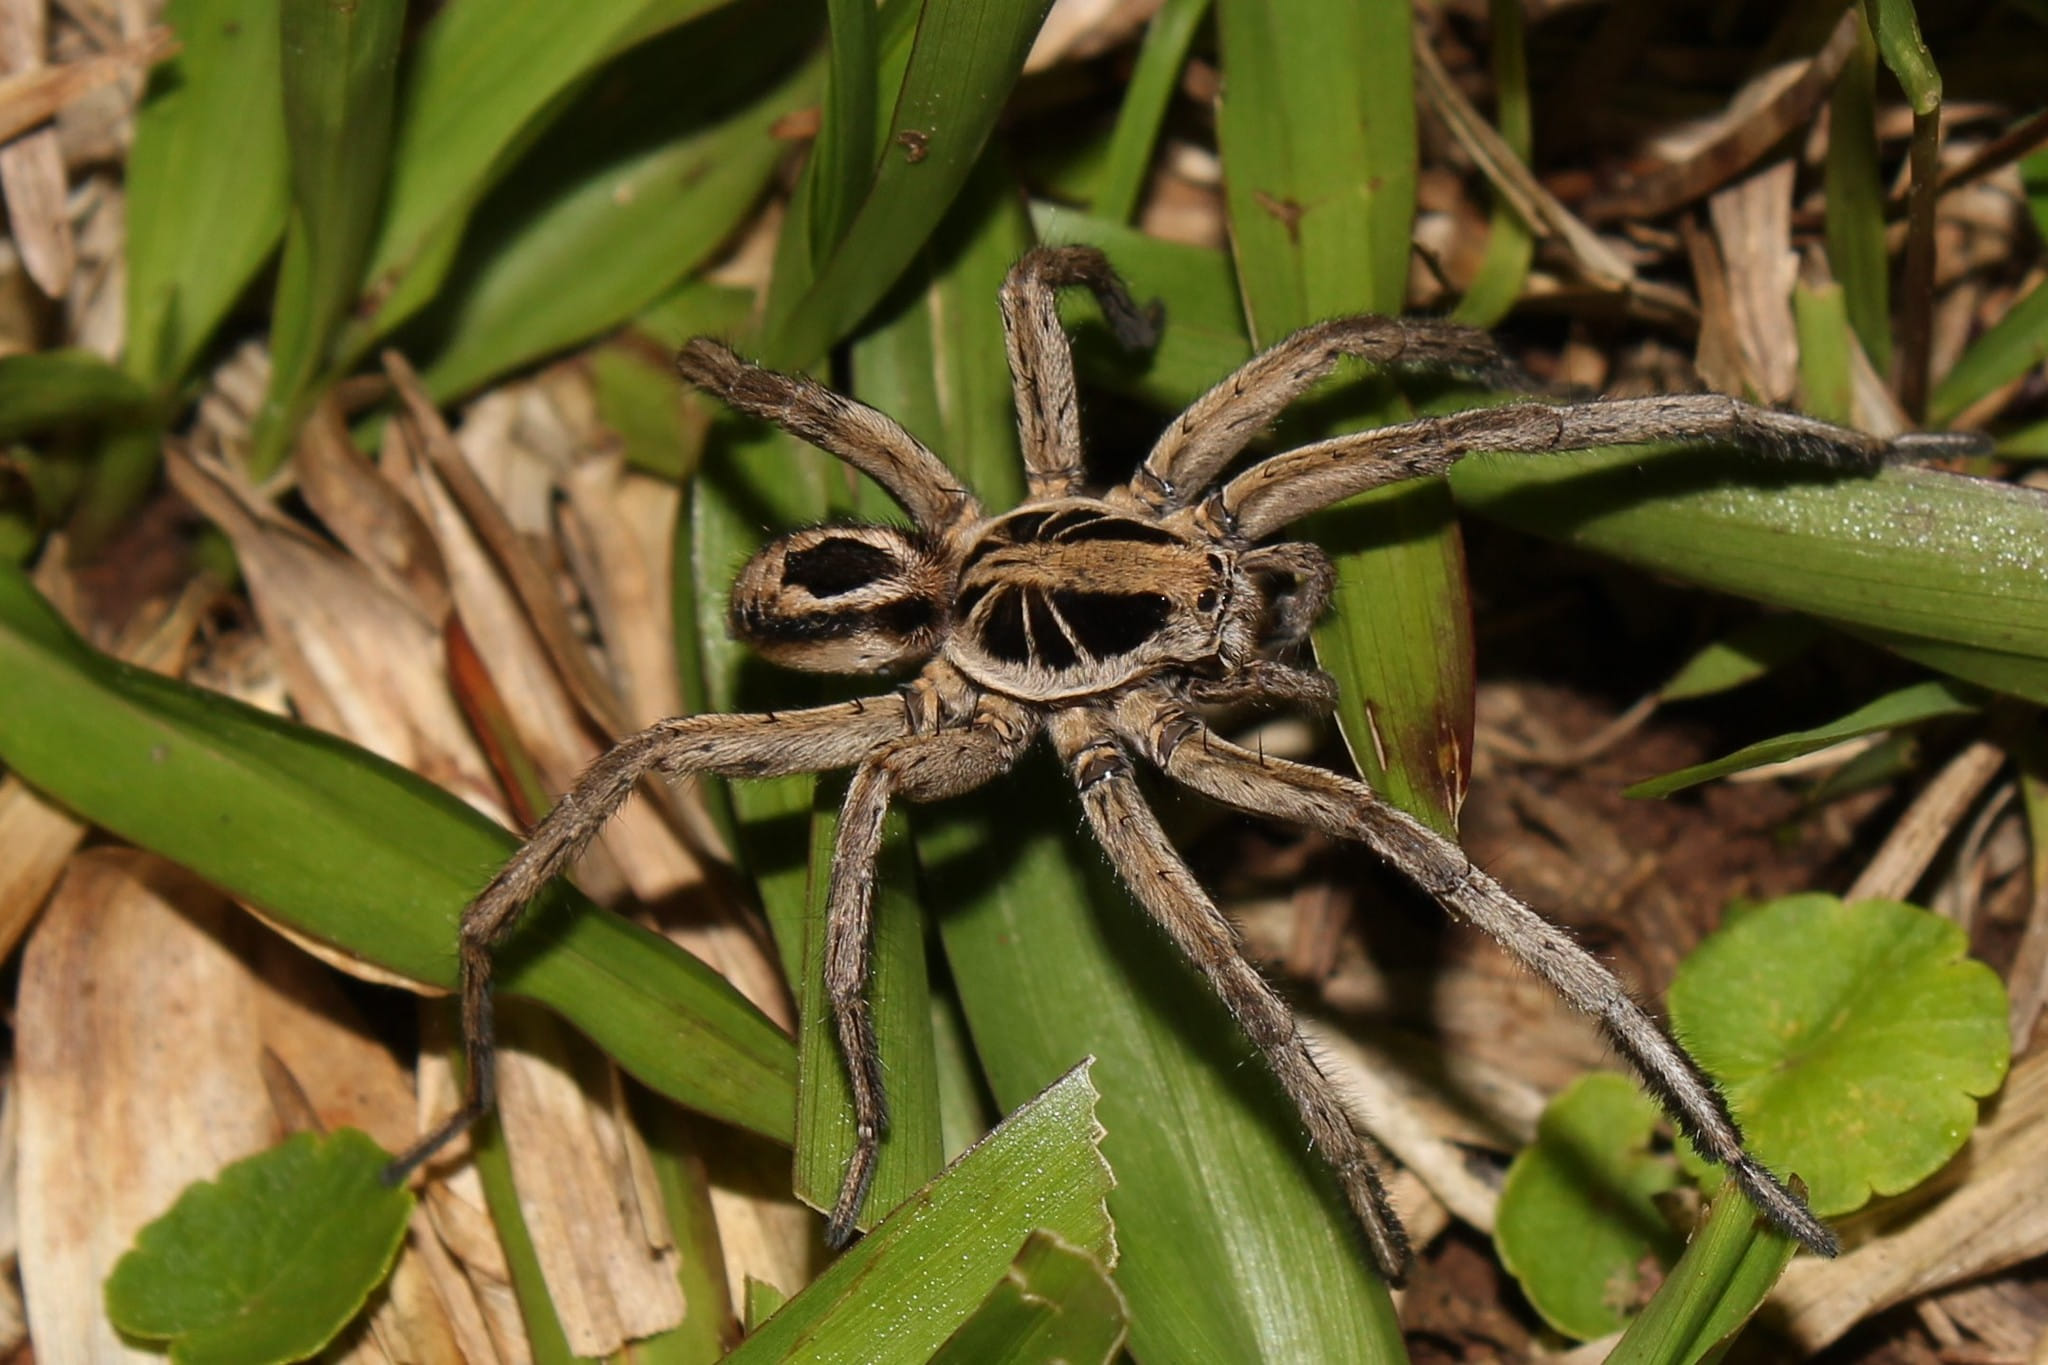 Wolf-spider among the grass